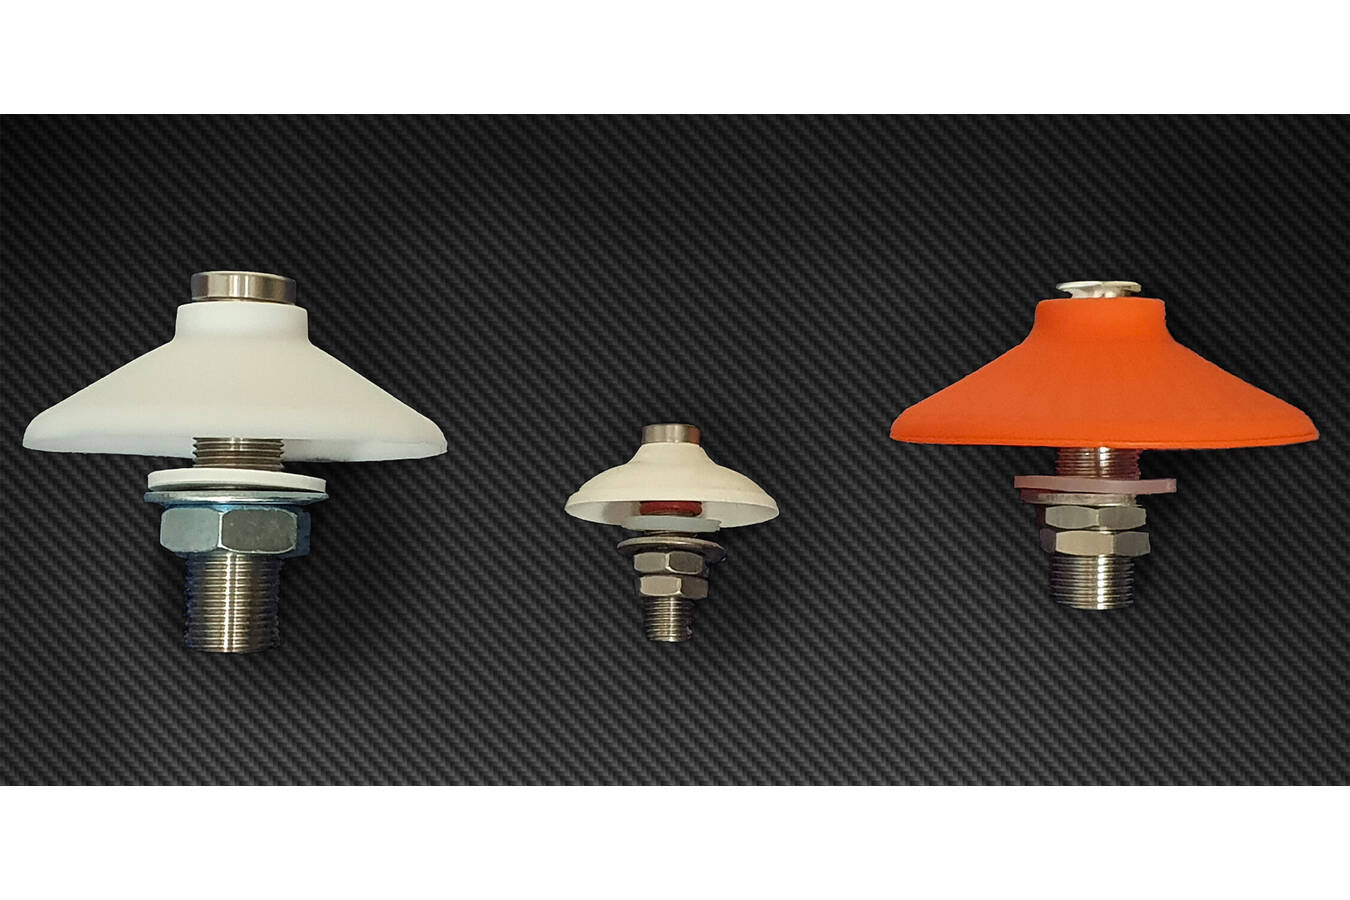 Fiktech expands range of Vibrating Bin Aerators The range of Vibrating Bin Aerators  (also called: fluidization discs, aeration pads, aeration discs) from Fiktech has been expanded. New options for external mounting of the entire aerator disk series were introduced.